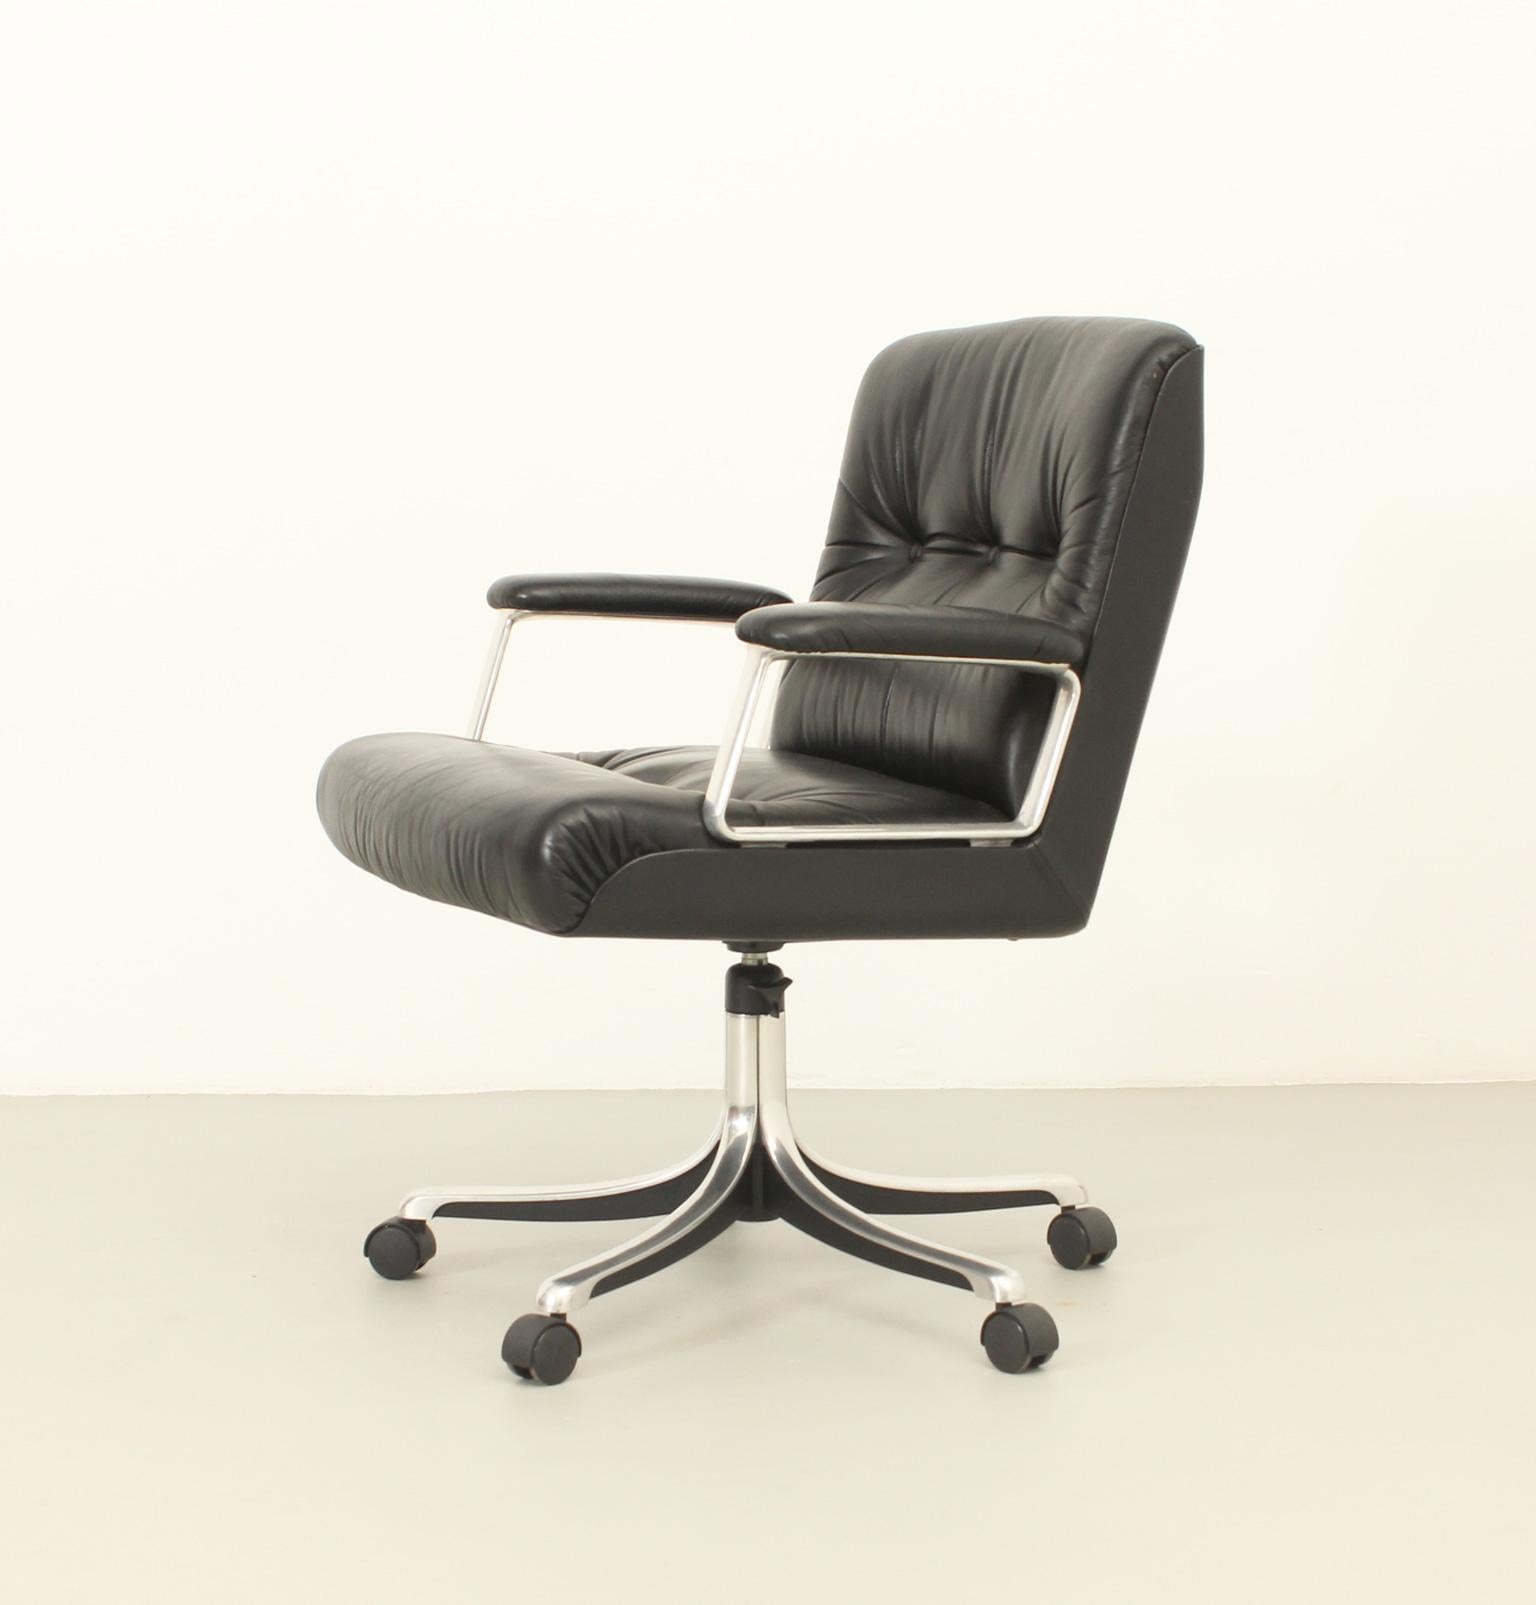 P126 office chair designed in 1966-76 by Osvaldo Borsani for Tecno, Italy. Cast aluminum with chrome-plated bases and original black leather upholstery. Swivel base with adjustable height and original casters. This is the 1976 version with the new